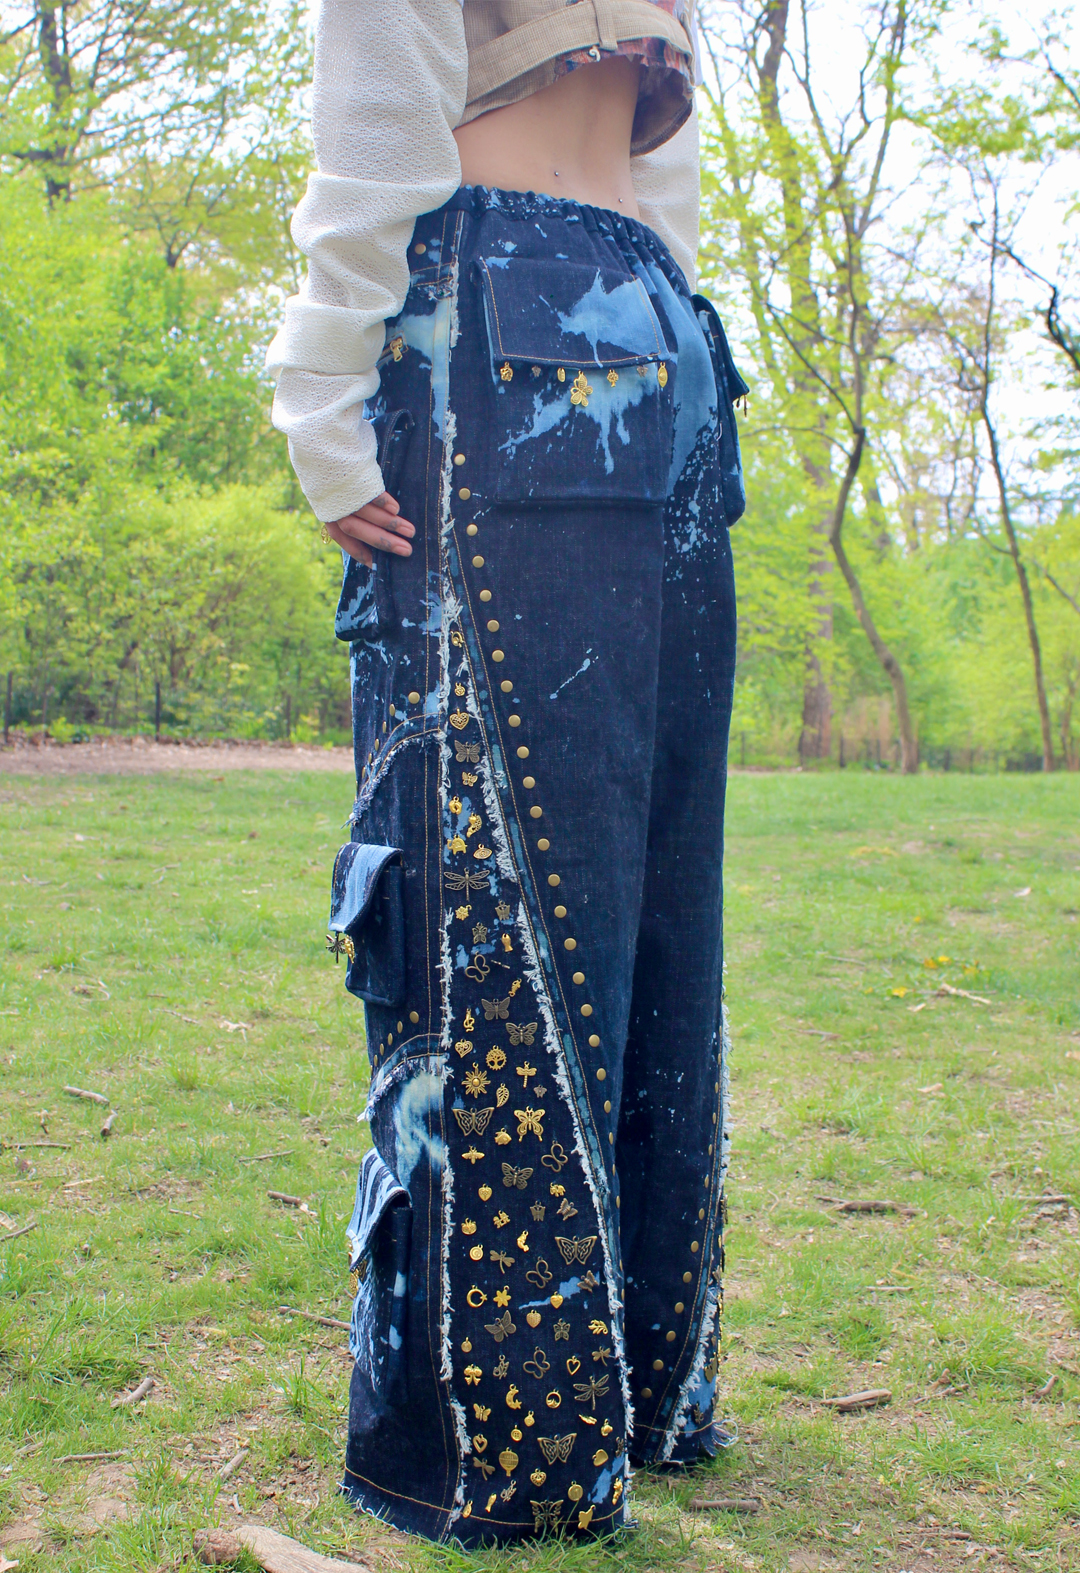 Three-quarter view of the baggy jean. Close-up view of  style lines with flat-fell seams and distressed edges. Bronze studding following along style lines. Hand-sewn gold and bronze charm embellishments along pocket flaps and filling side area. Charms include many shapes, such as butterflies, other insects, and flowers. 